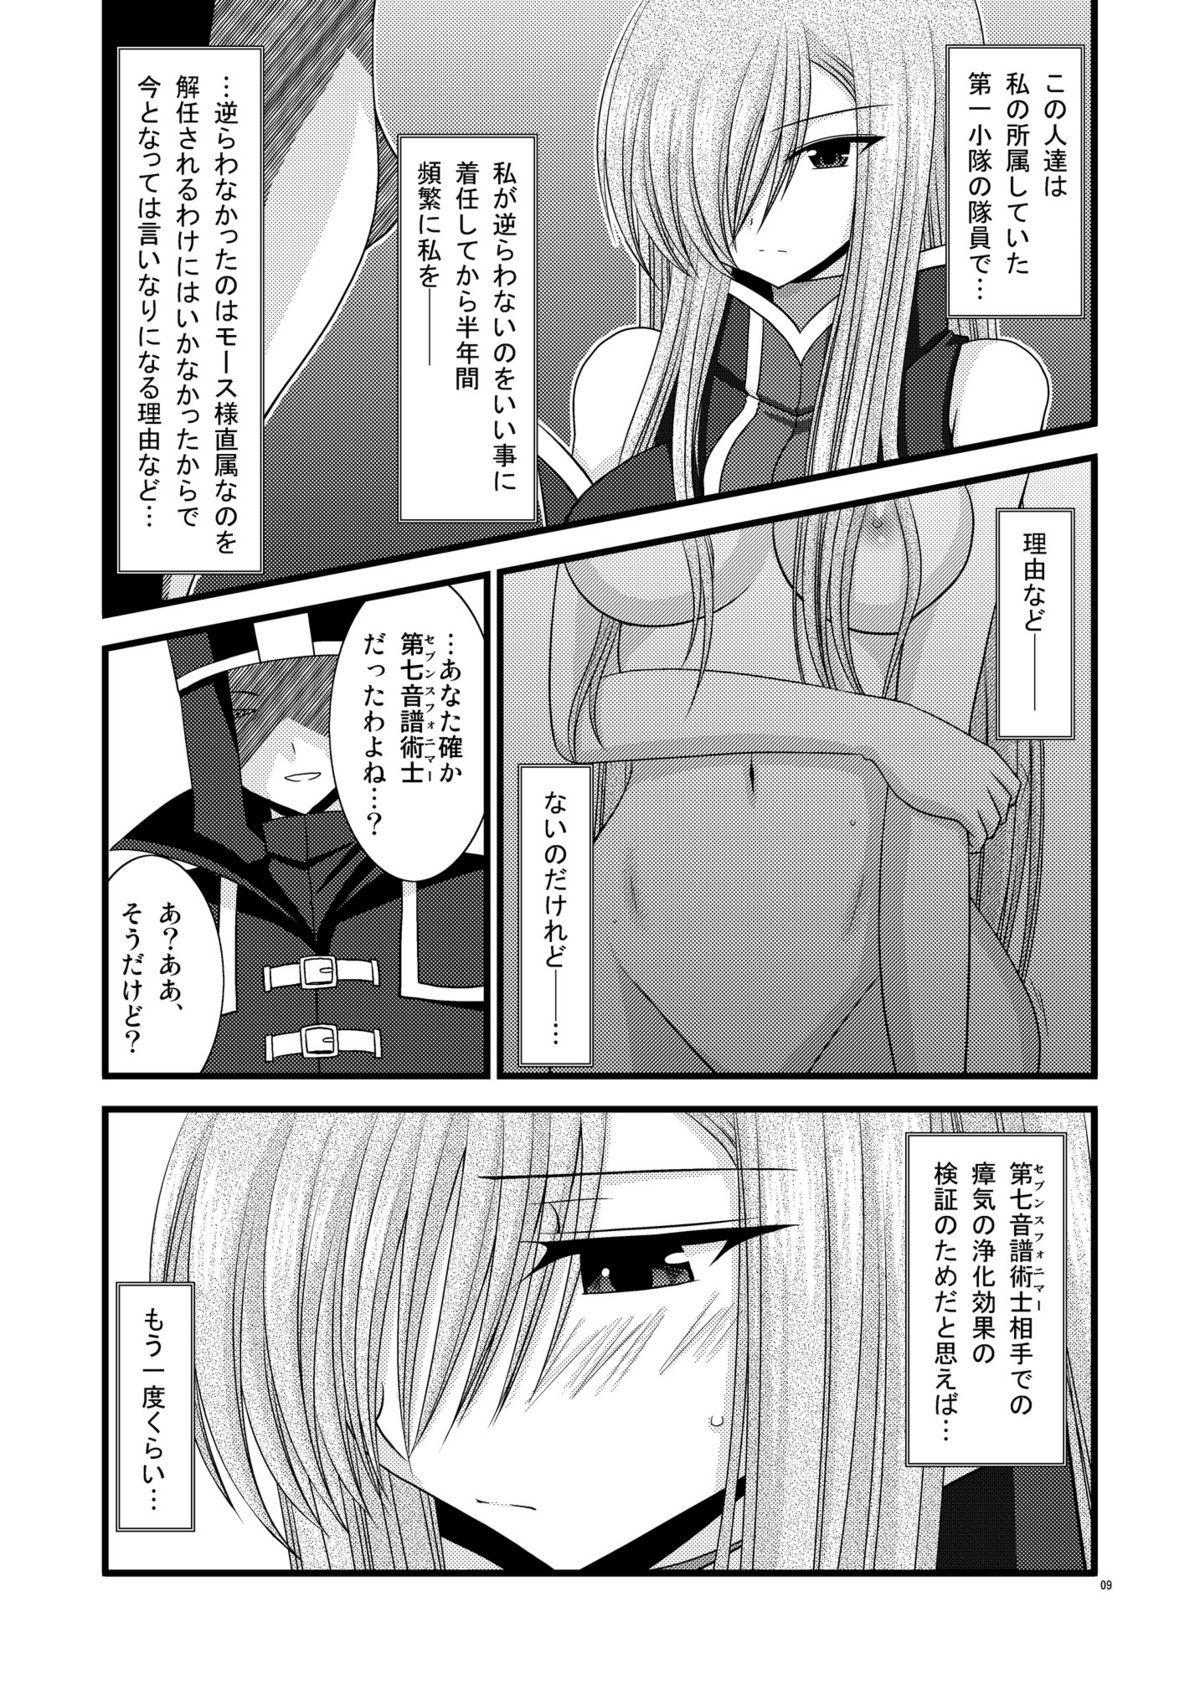 Assfucking Melon Ni Kubittake! 4 - Tales of the abyss Firsttime - Page 8